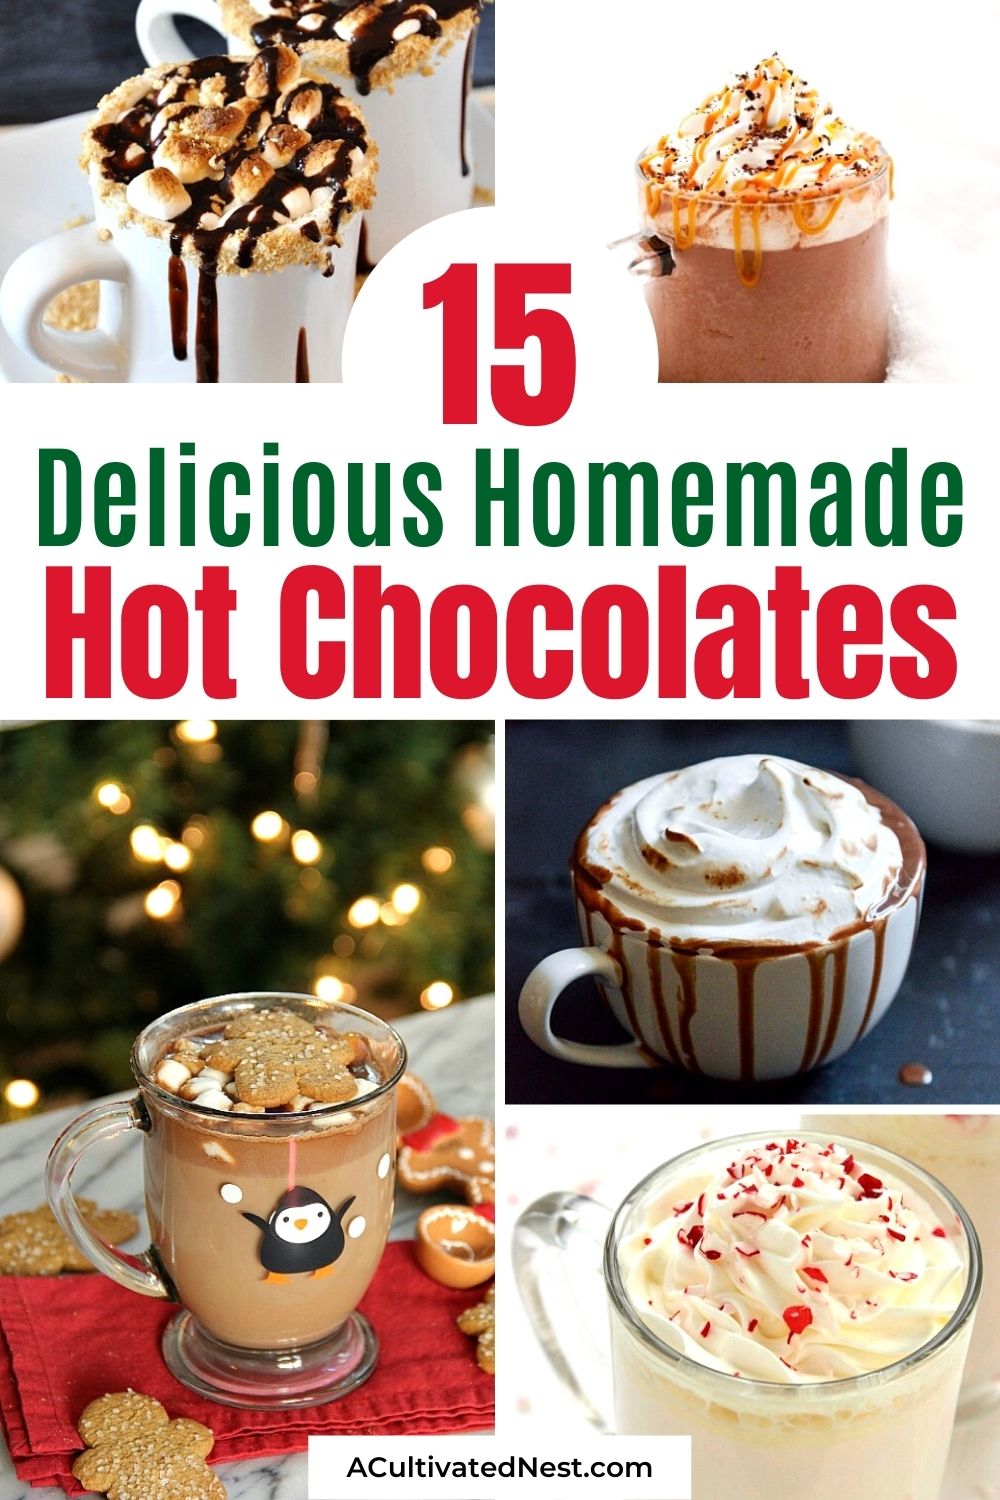 15 Delicious Homemade Hot Chocolates- This winter, don't drink plain hot chocolate. Instead, try something new and delicious with one of these homemade hot chocolate recipes! There are so many tasty ways to make hot cocoa at home! | #drinkRecipes #hotChocolate #hotCocoaRecipes #hotDrinkRecipes #ACultivatedNest